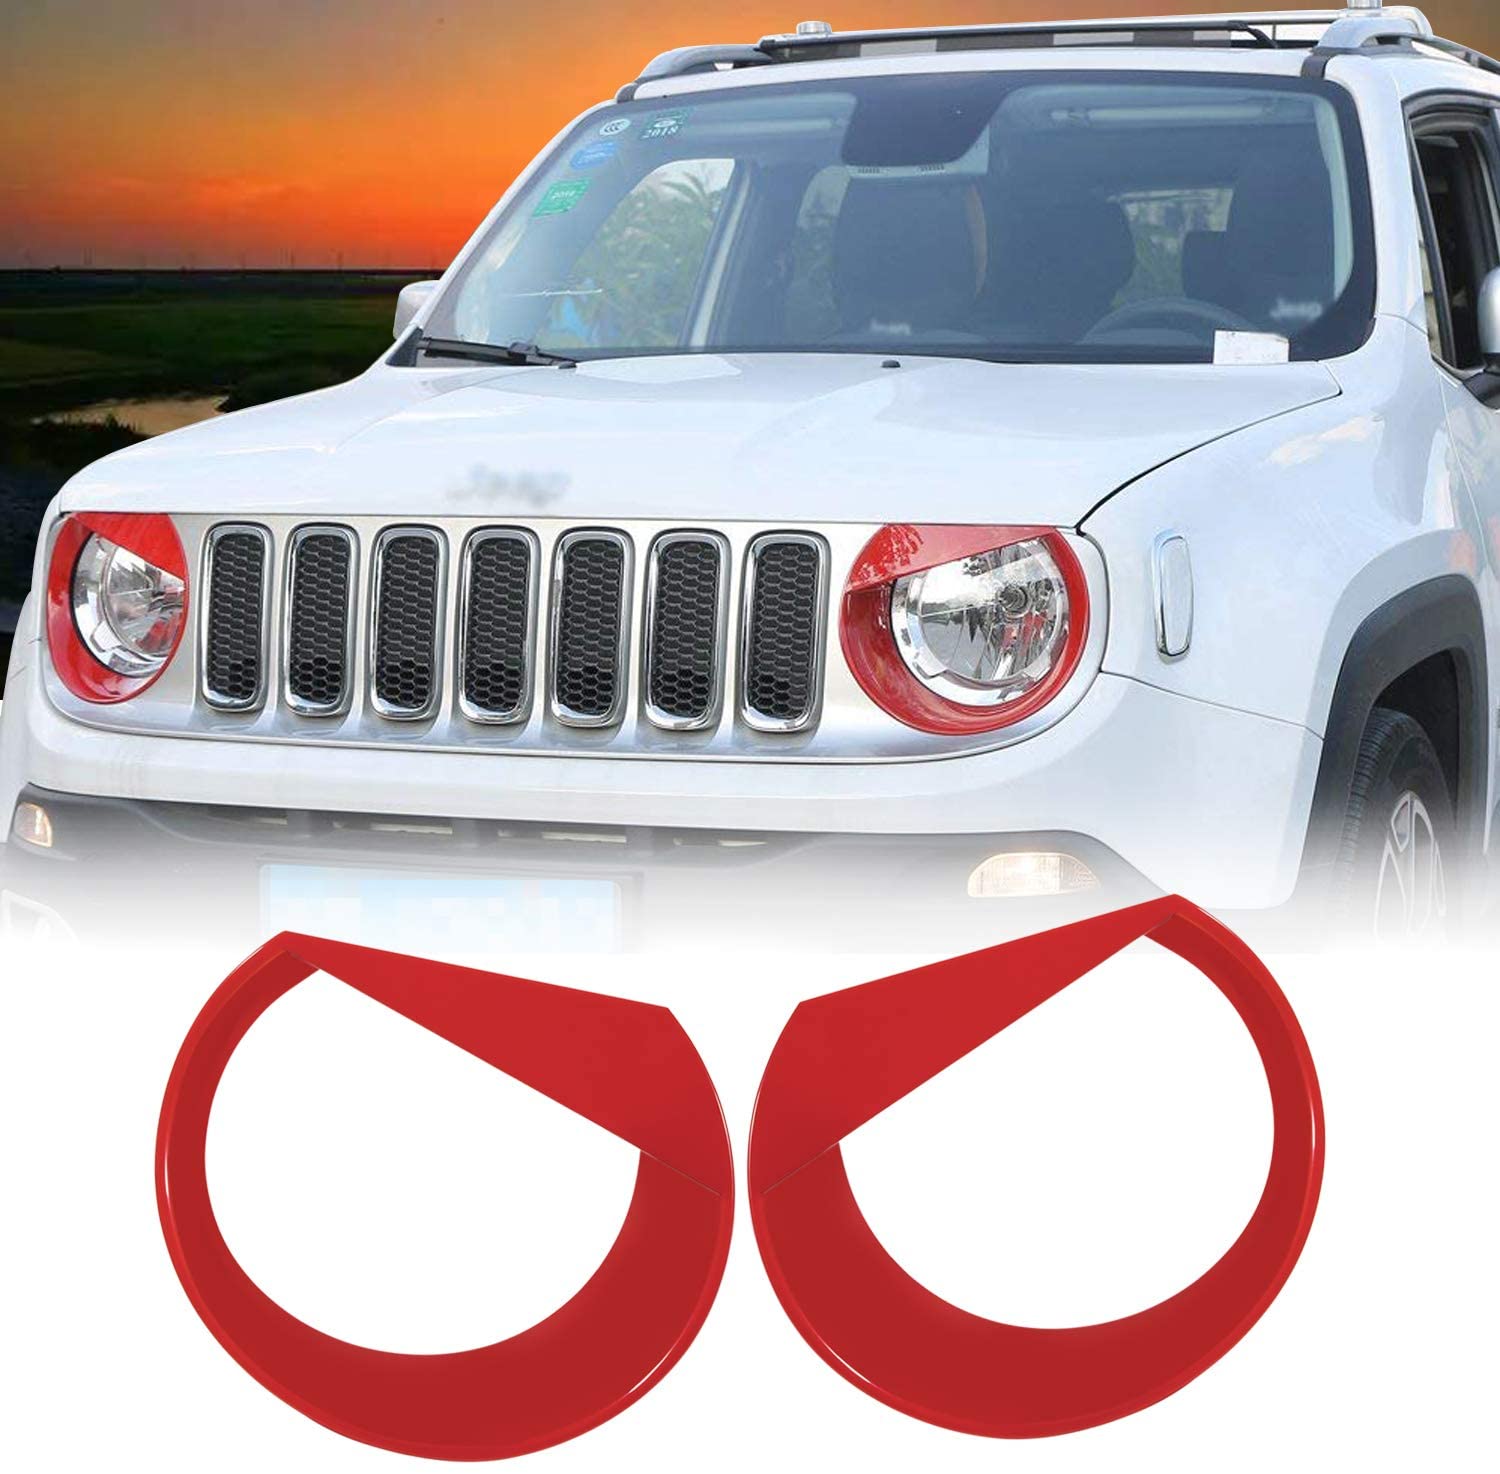 Headlight Covers Trim Fit for Jeep Renegade 2015 - 2018 – OffGrid